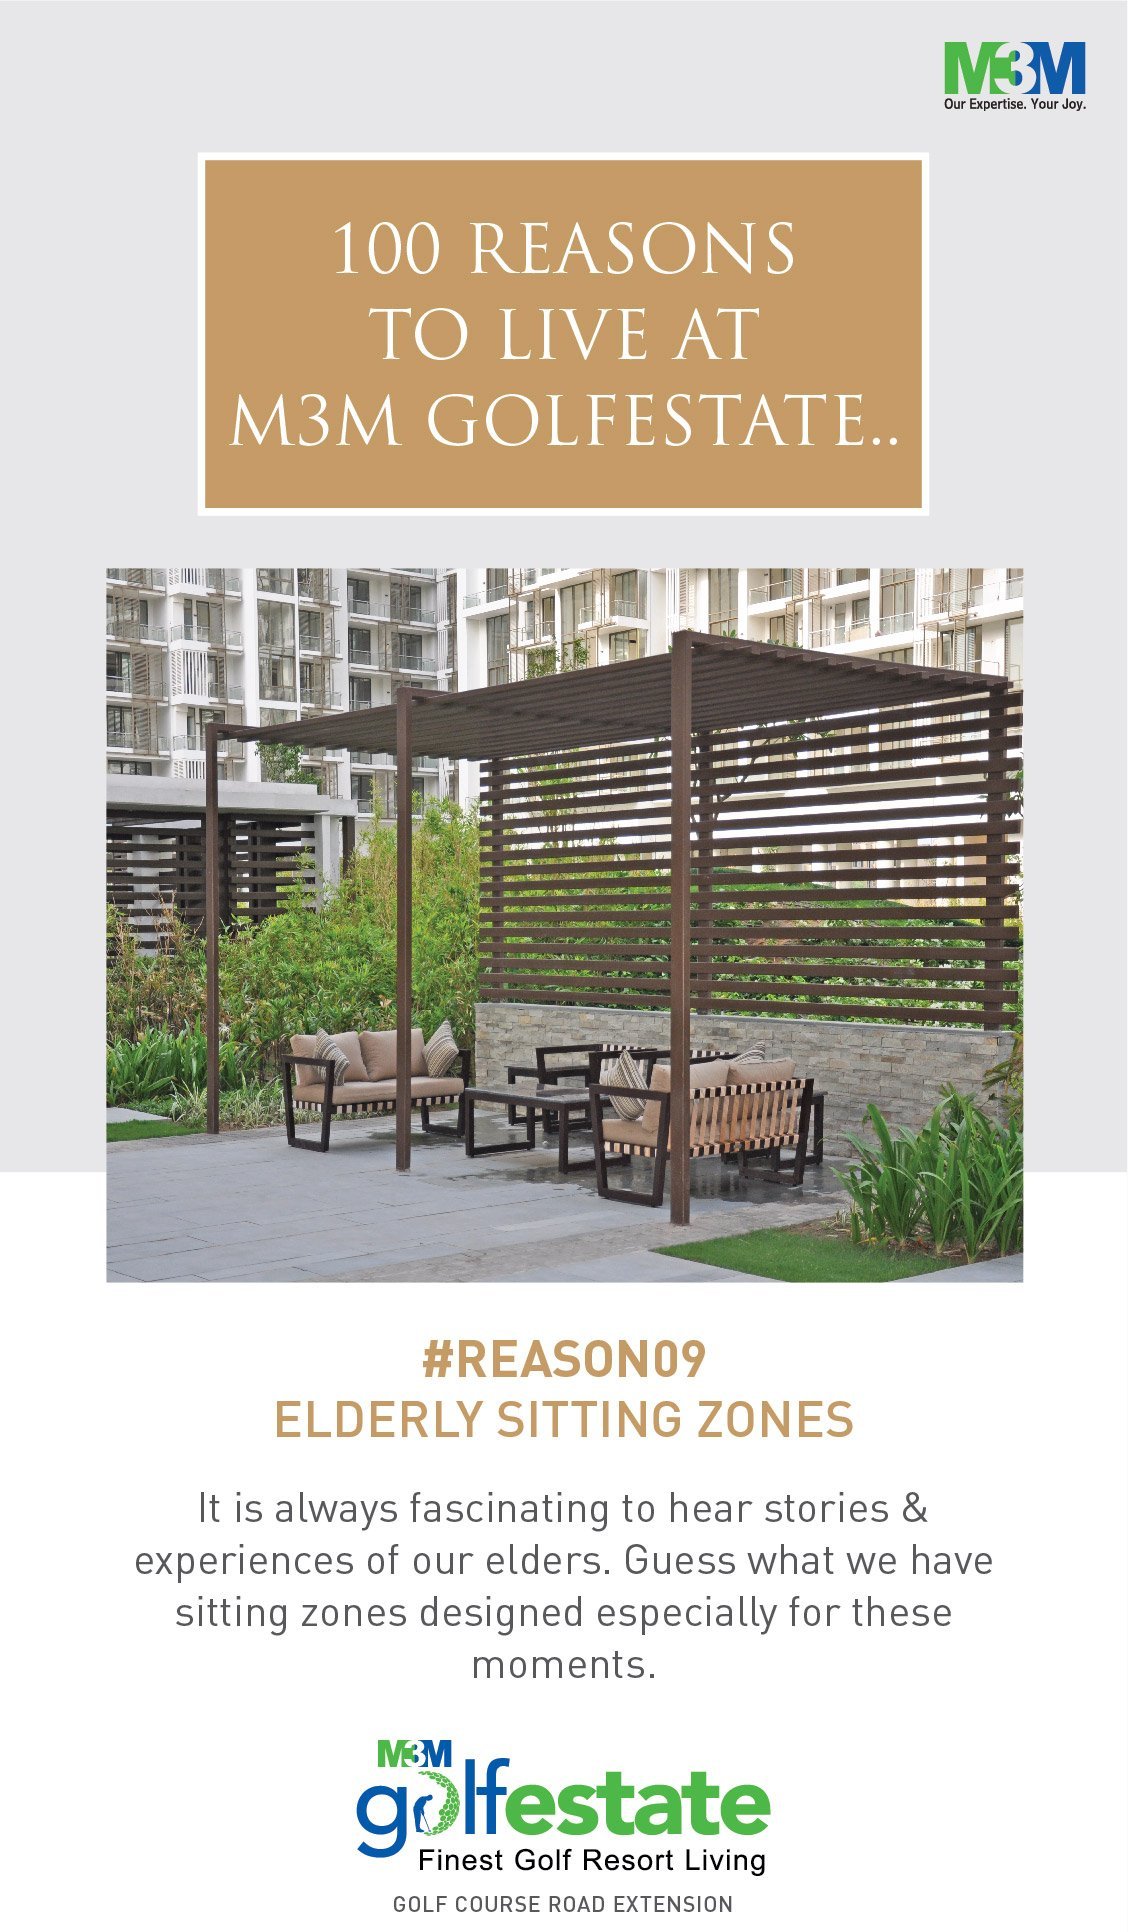 Sitting zones designed to listen stories from your elders at M3M Golf Estate Update